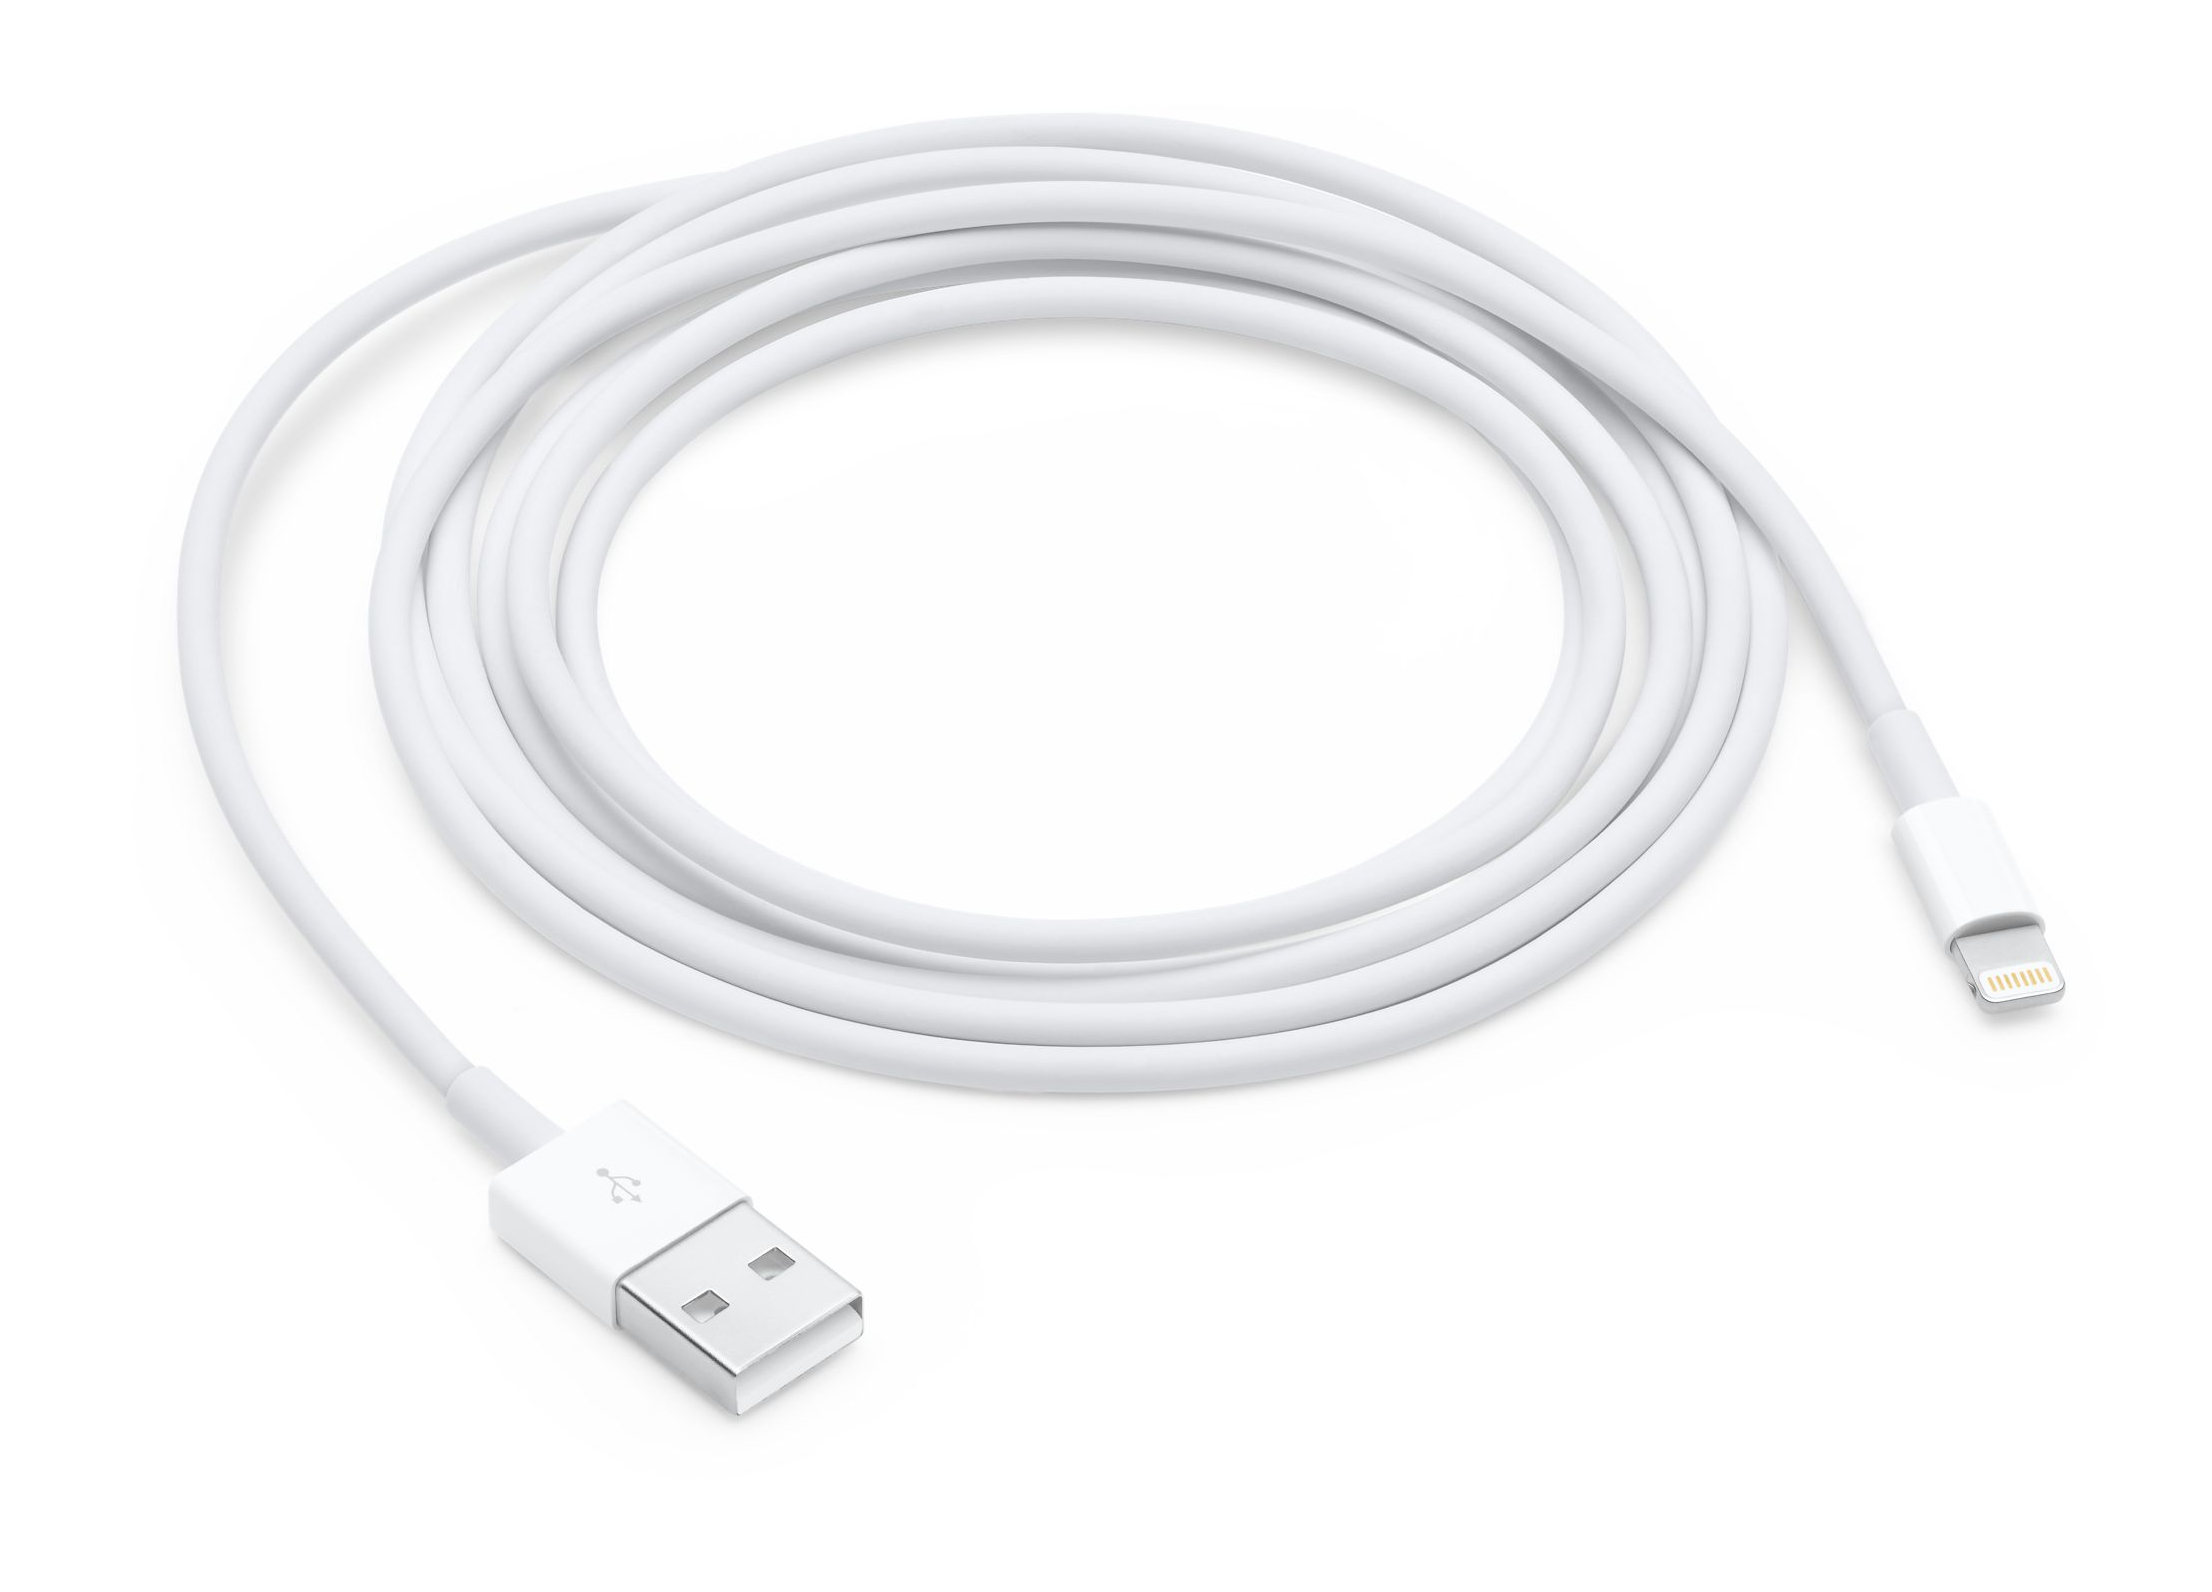  VMI Lightning to USB Cable 2m iPhone 5, iPod touch 5. Gen iPod nano 7. Generation